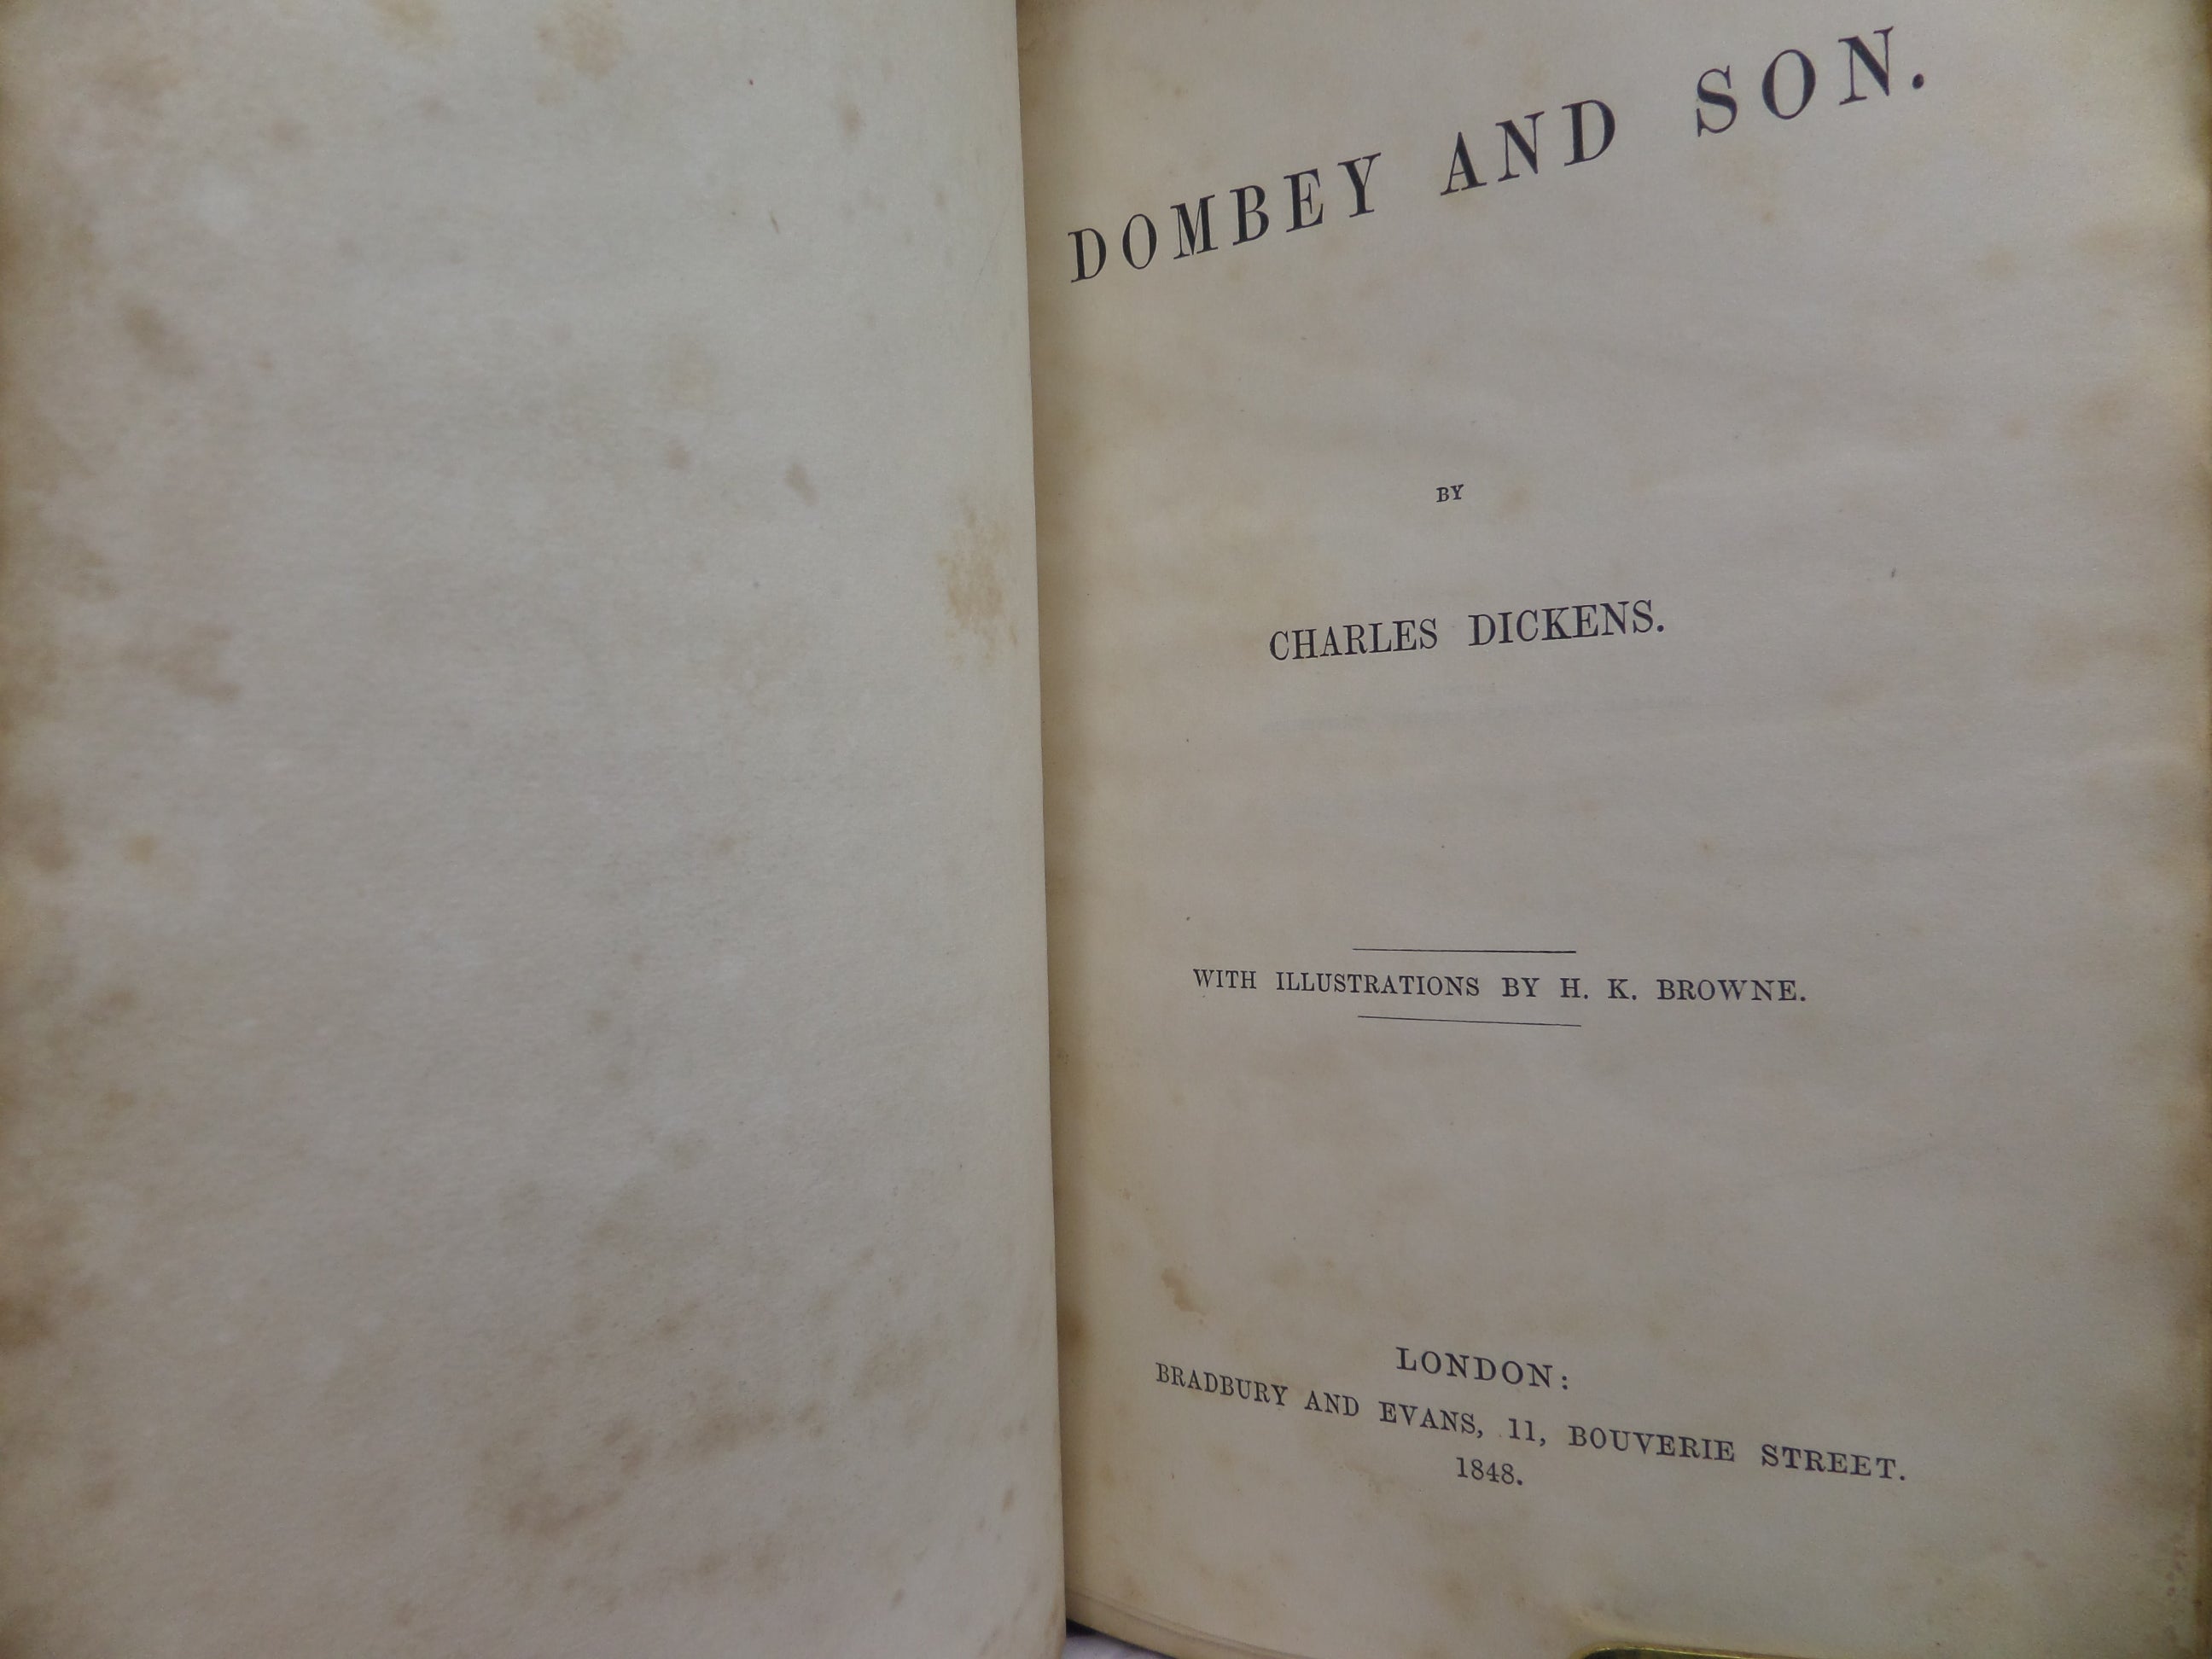 DOMBEY AND SON BY CHARLES DICKENS 1848 FIRST EDITION, FINE LEATHER BINDING